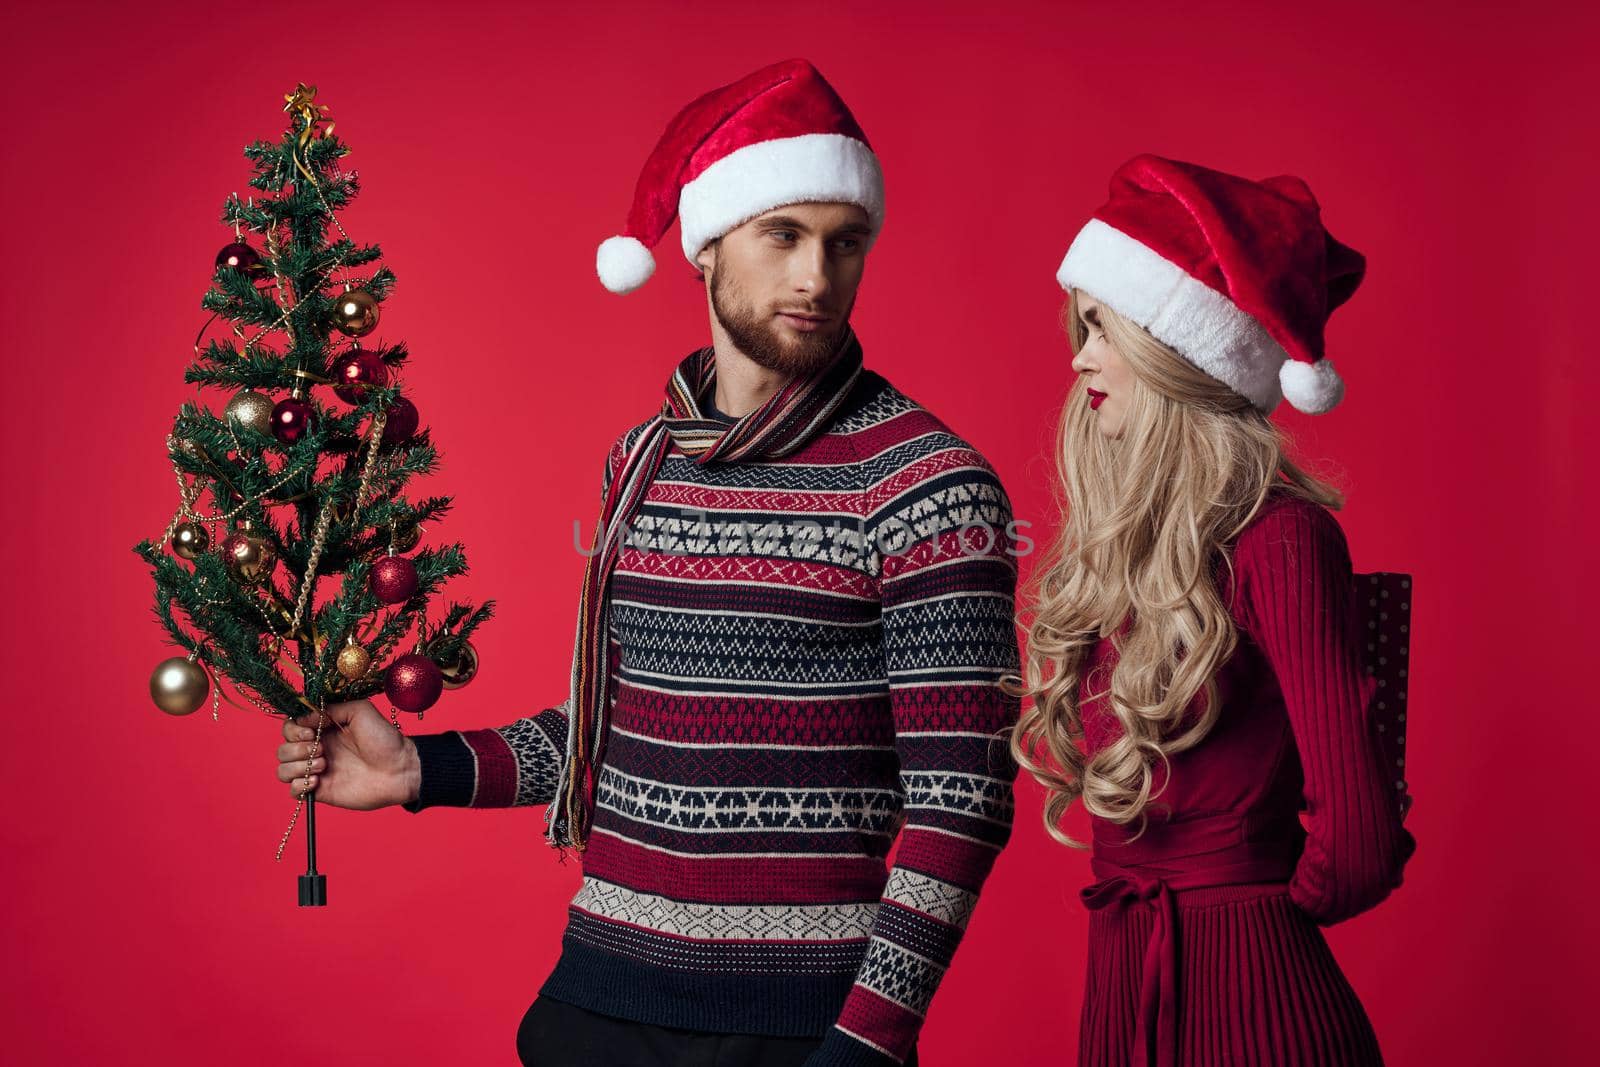 young couple christmas decorations holiday posing red background by SHOTPRIME